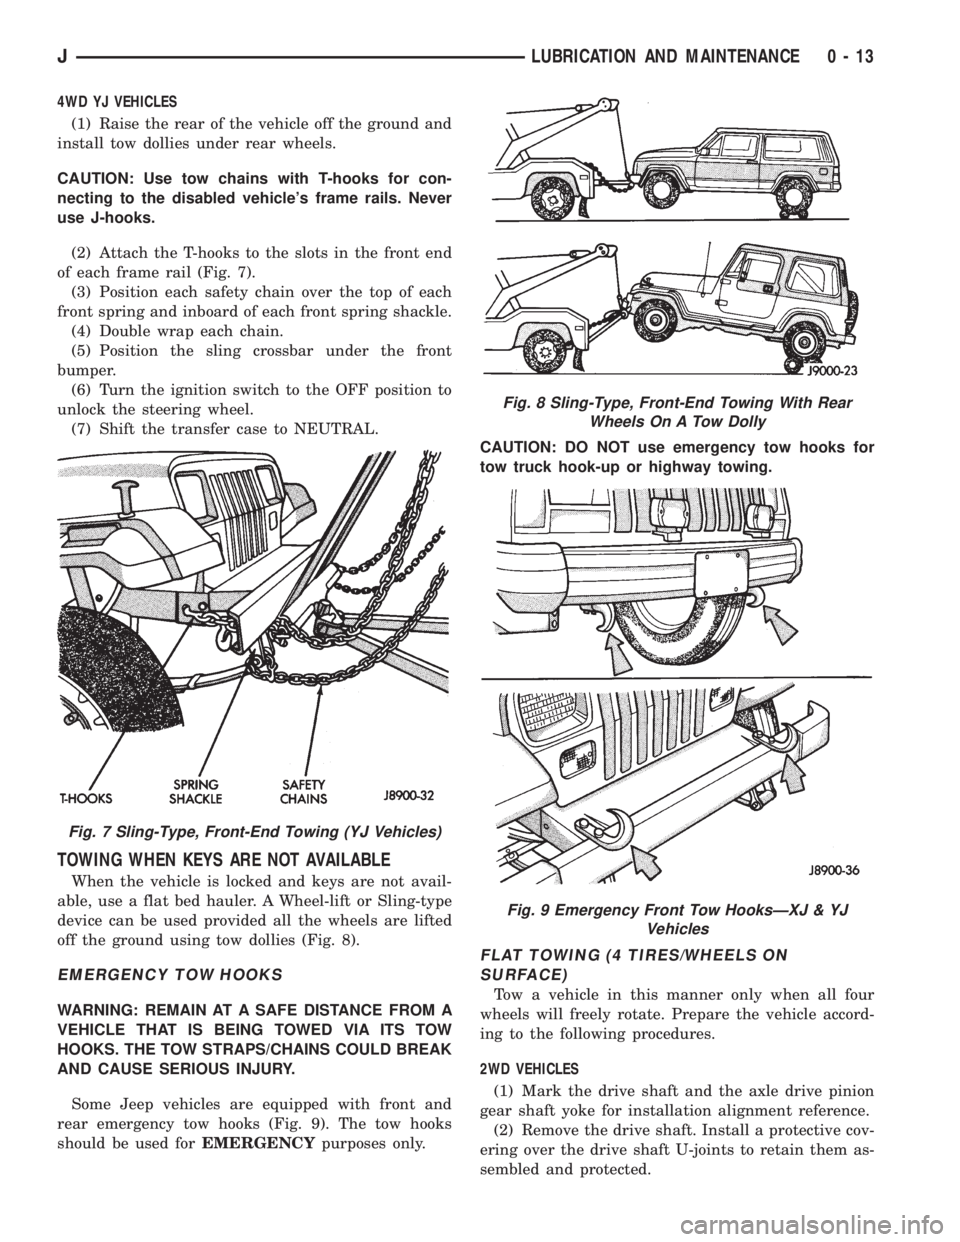 JEEP XJ 1995  Service And Repair Manual 4WD YJ VEHICLES
(1) Raise the rear of the vehicle off the ground and
install tow dollies under rear wheels.
CAUTION: Use tow chains with T-hooks for con-
necting to the disabled vehicles frame rails.